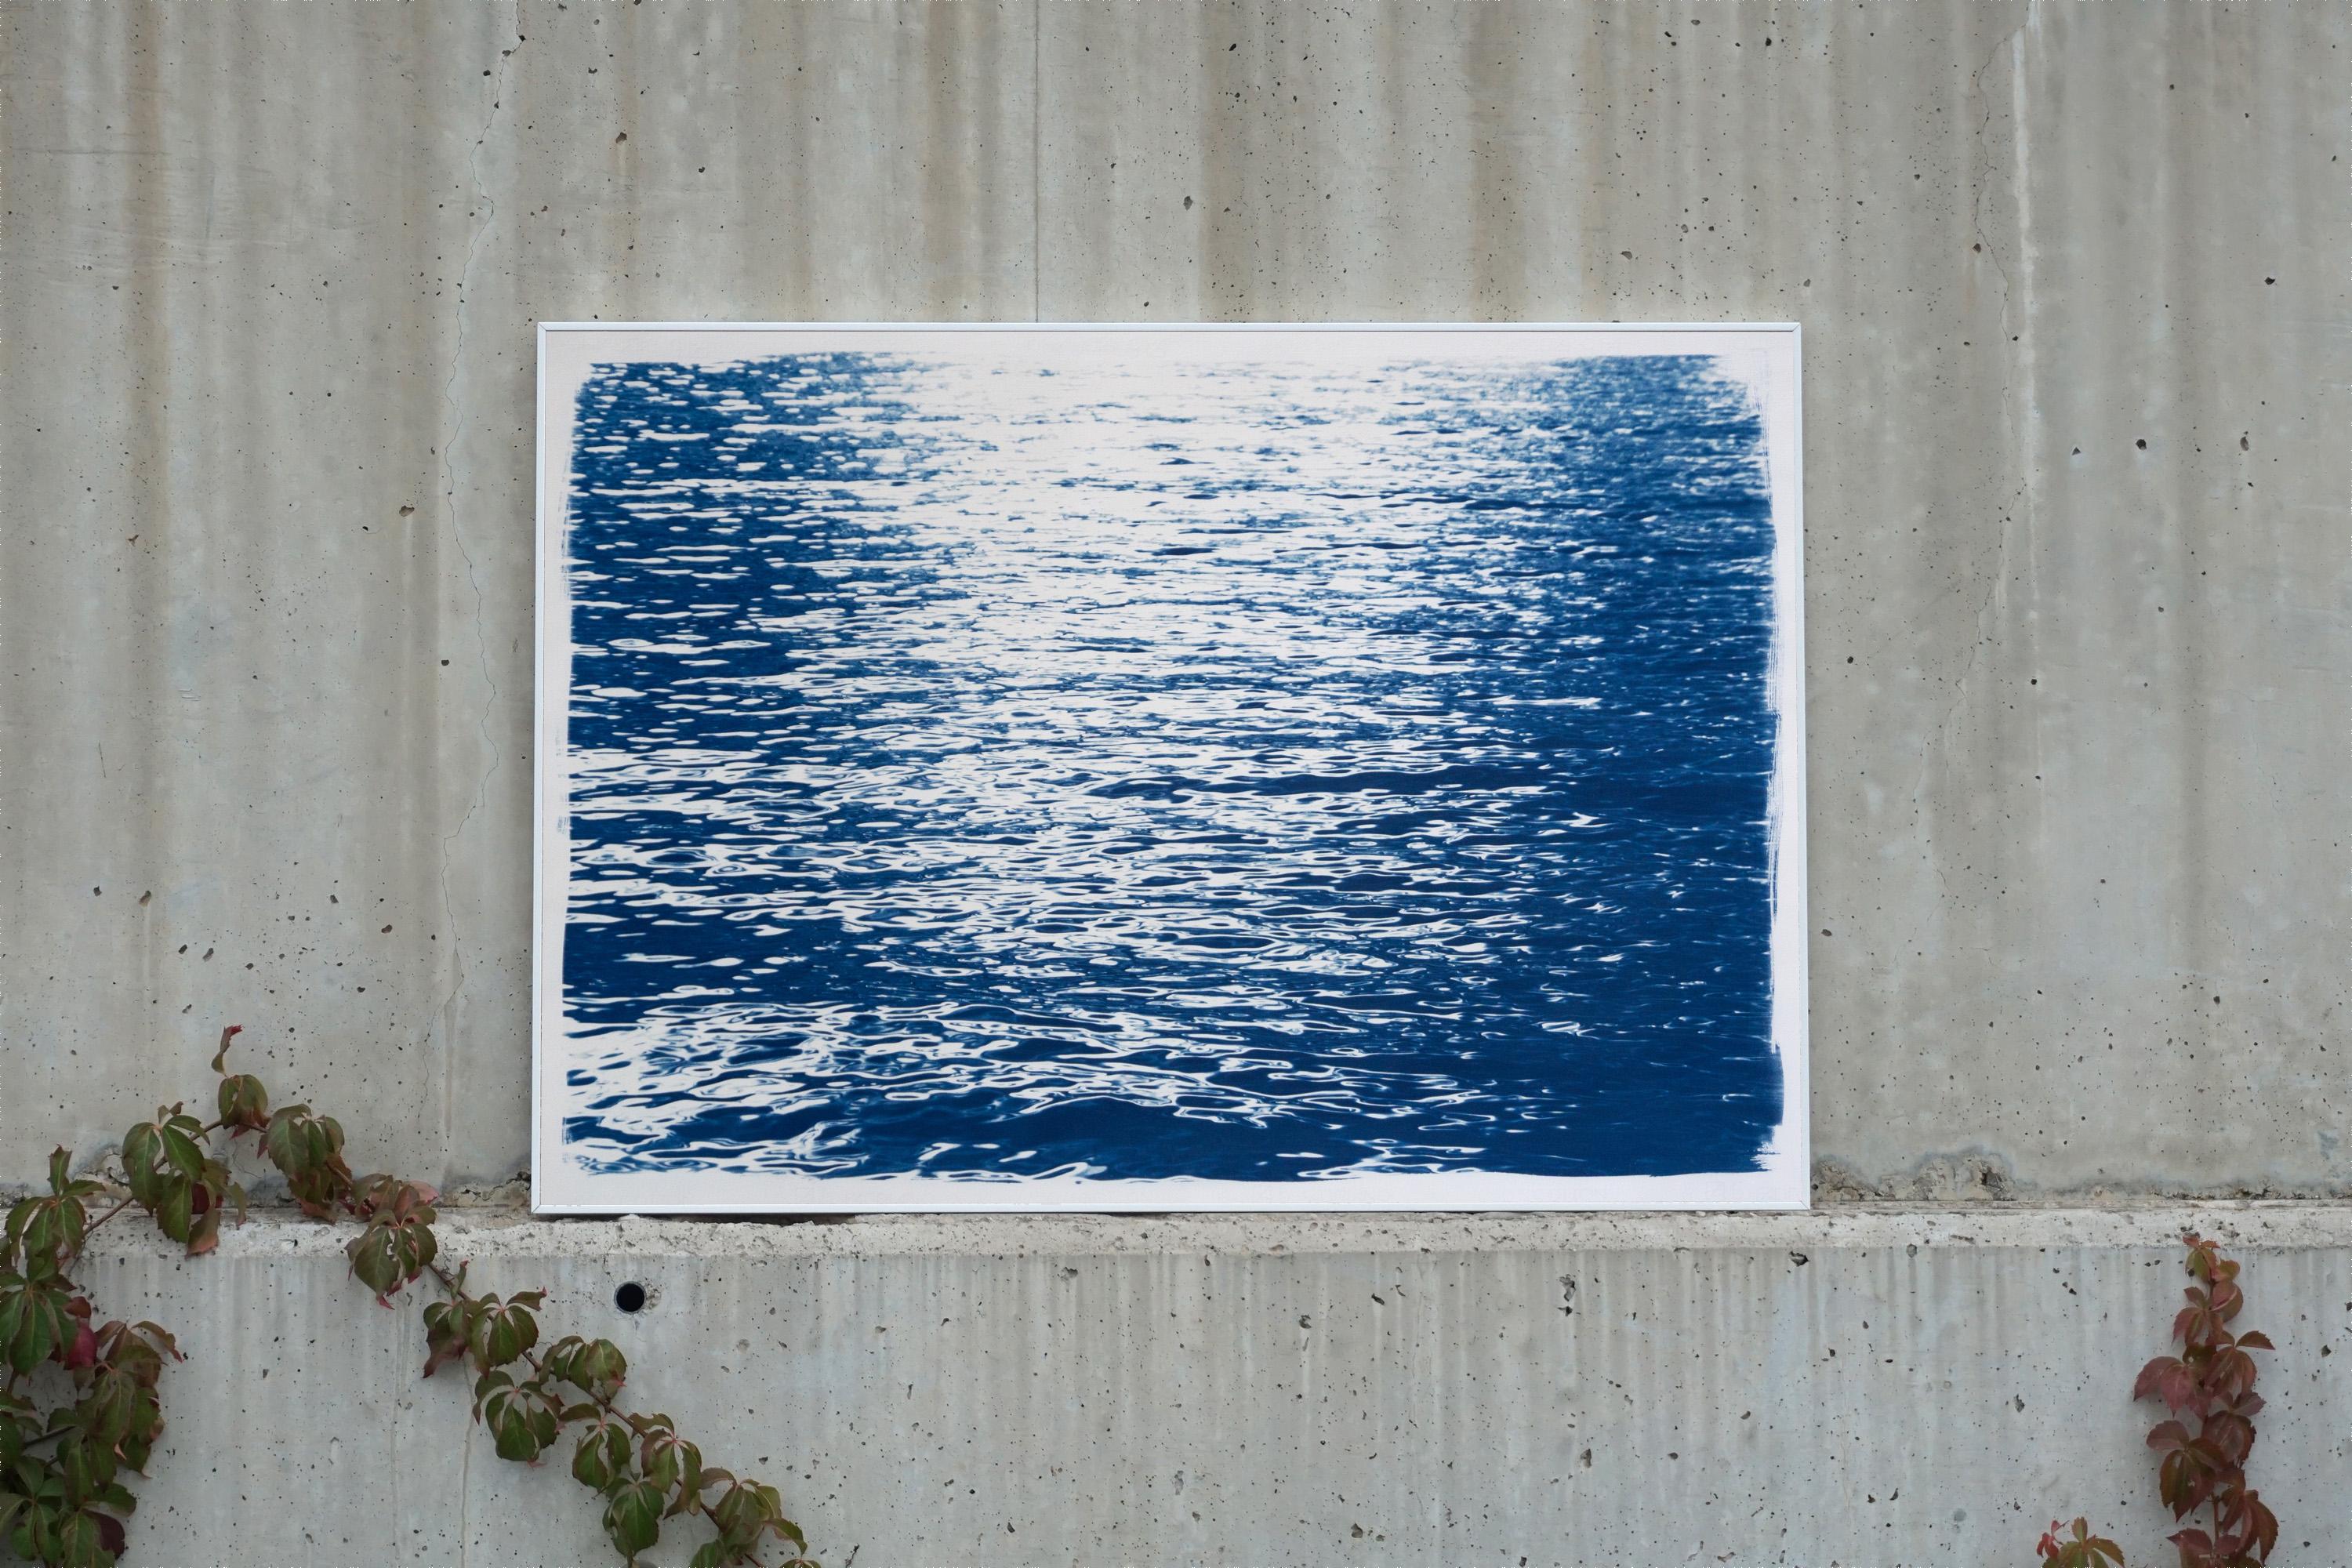 Blue Abstract Ripples Under Moonlight, Contemporary Cyanotype, Water Reflections - Print by Kind of Cyan